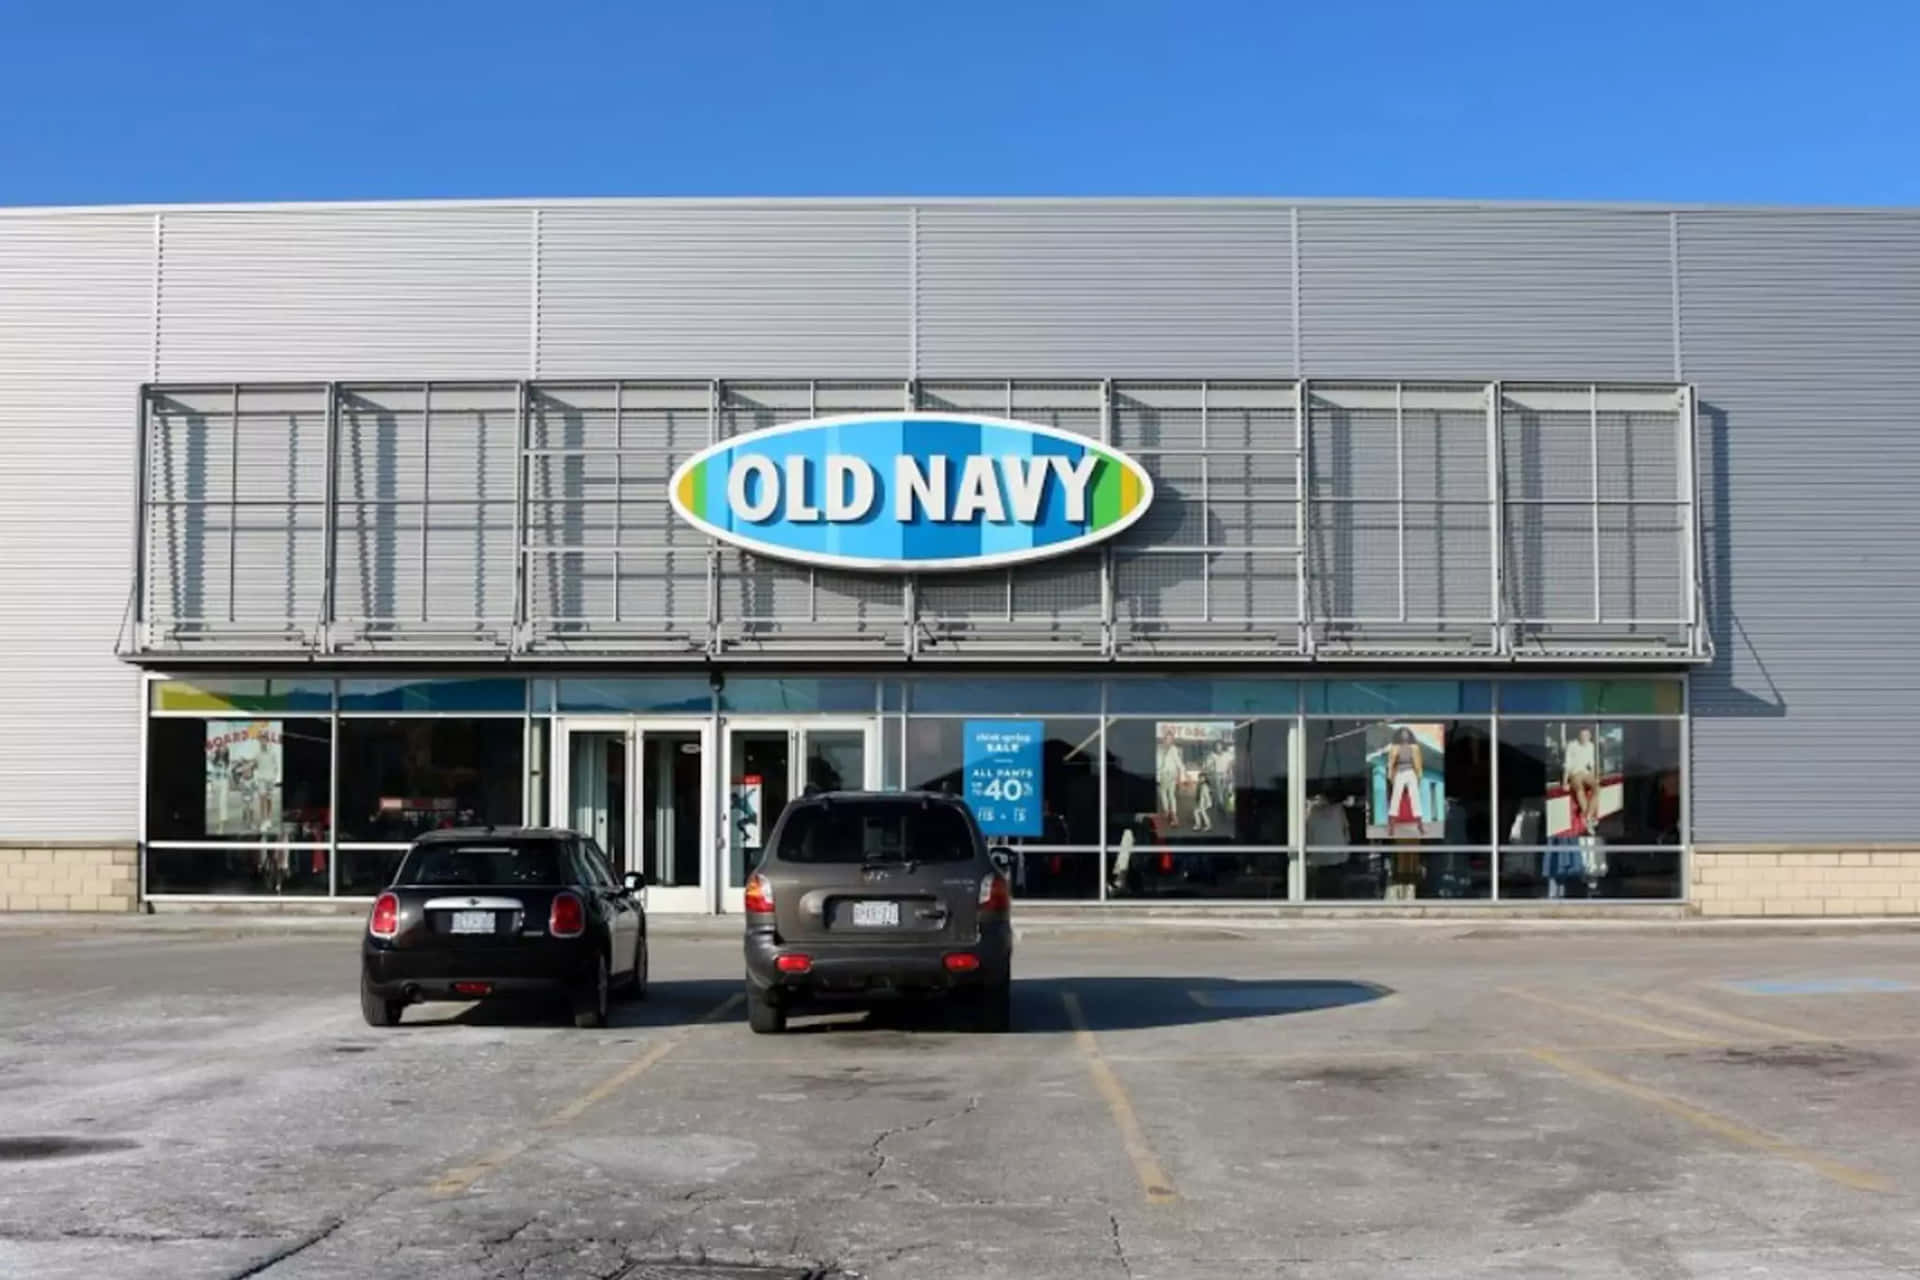 Look fashionable and hip all year round with the latest collection of apparel at Old Navy